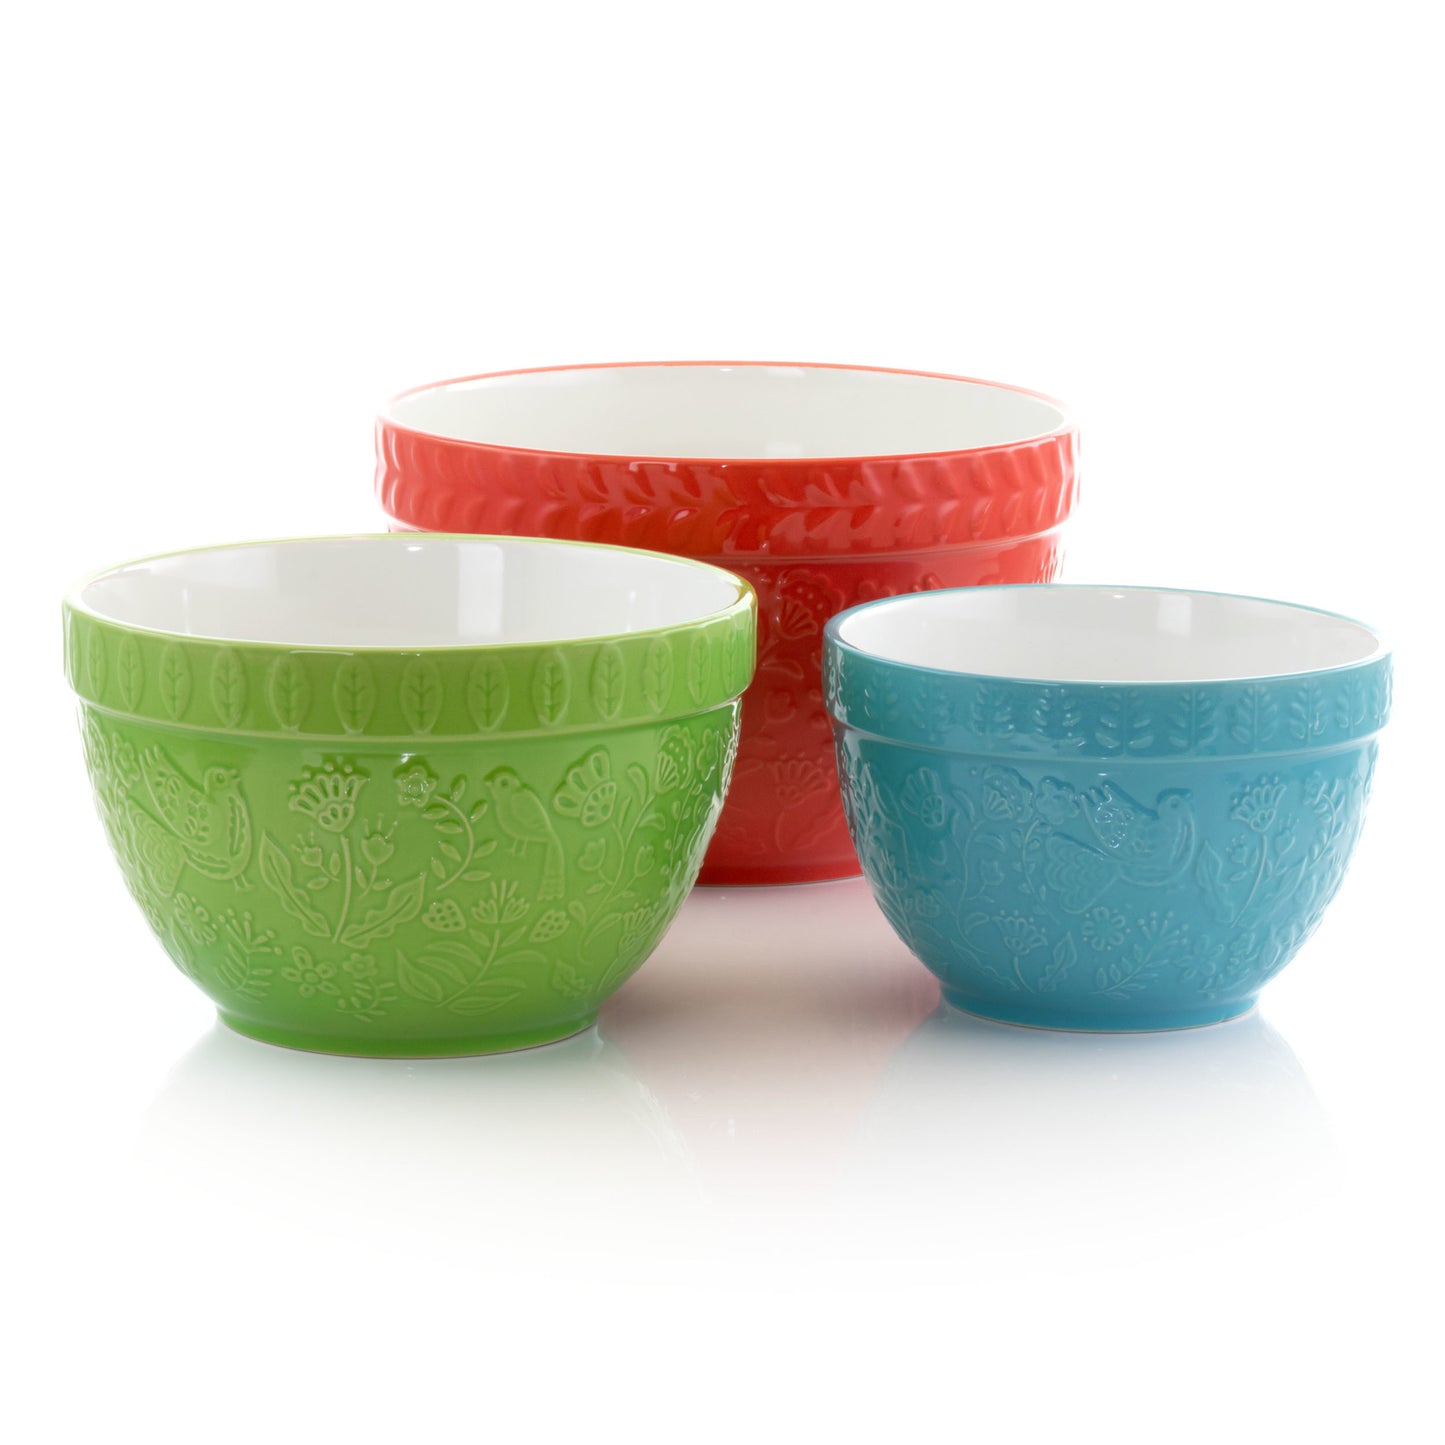 Gibson Abbey Stoneware 3 Piece Nesting Bowls in Assorted Colors